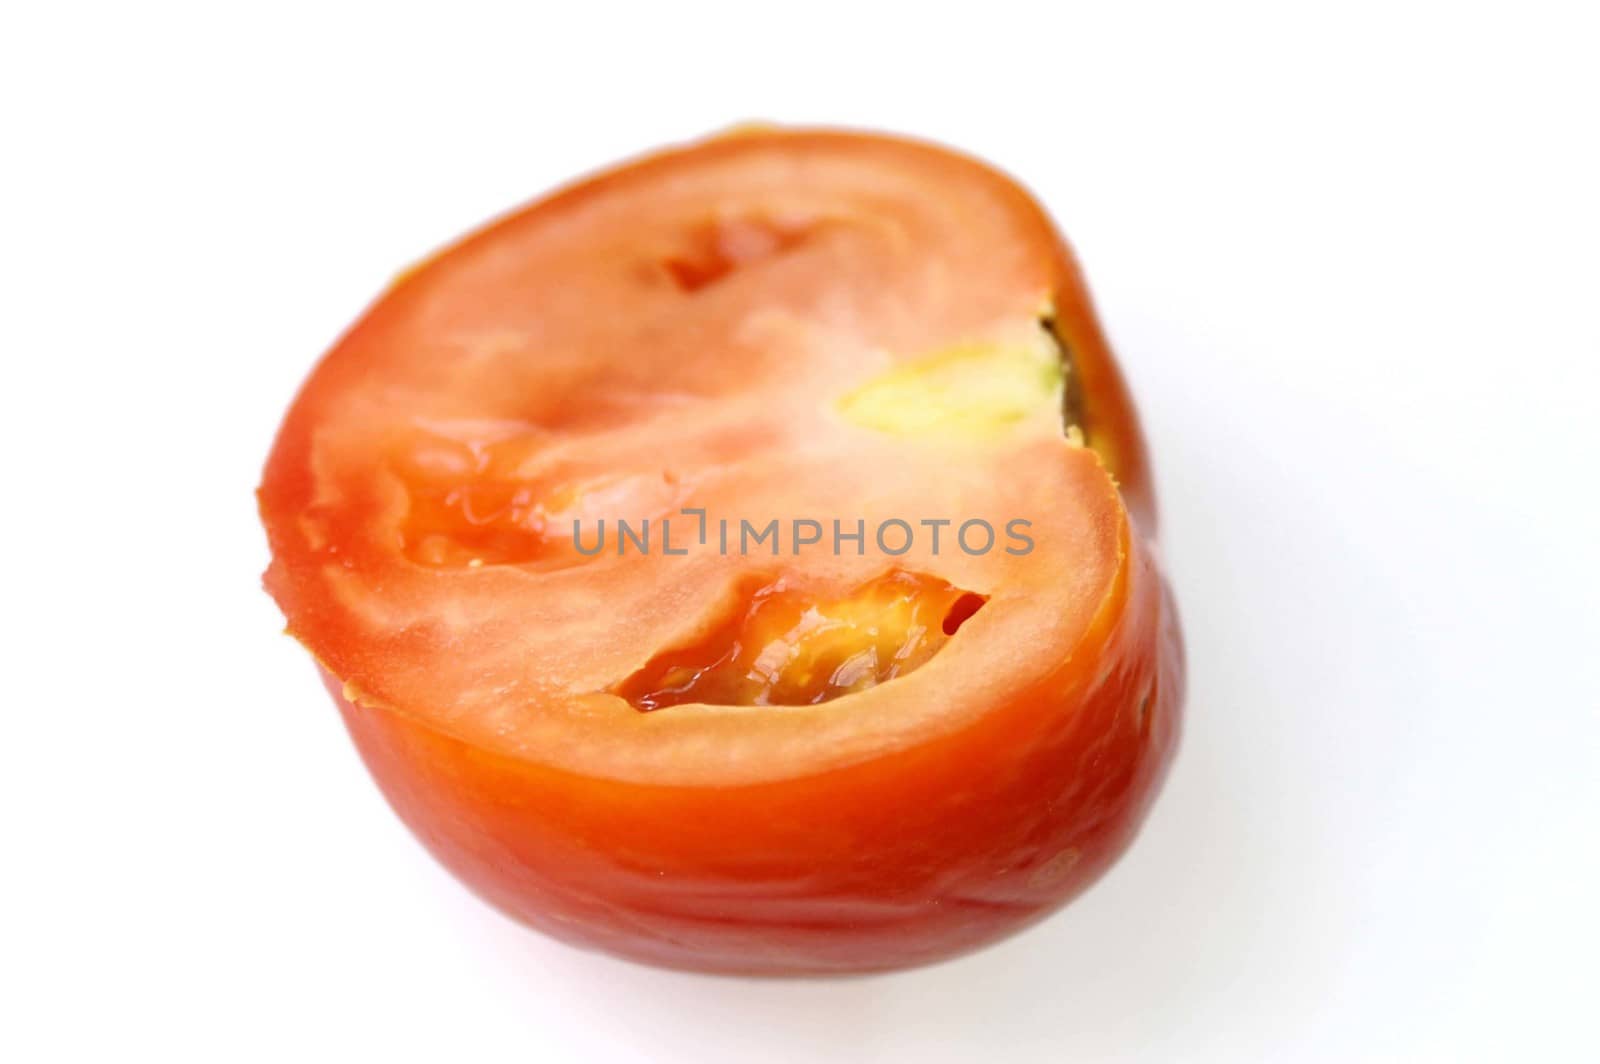 Cutting a tomato with a knife on a coocking desk